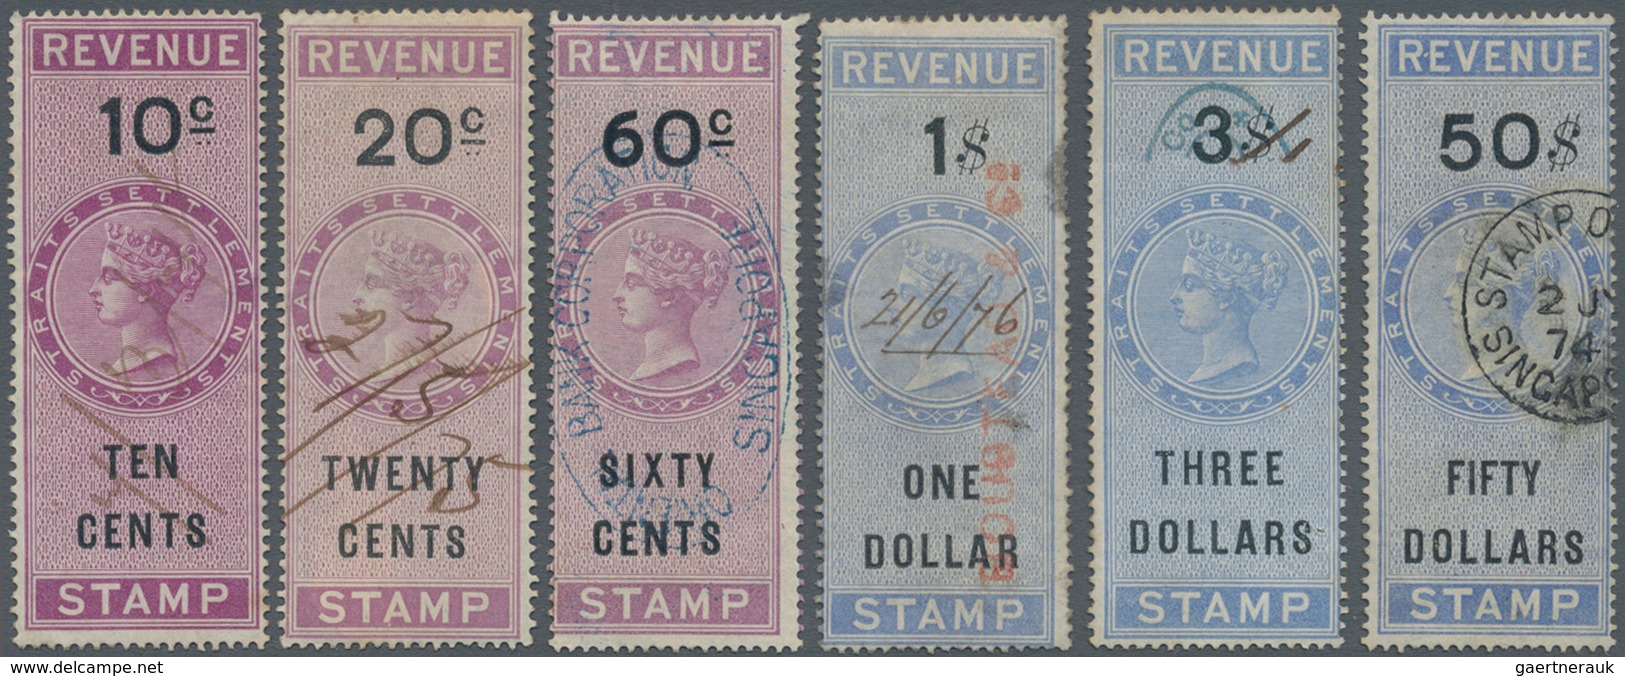 Malaiische Staaten - Straits Settlements: 1874 REVENUES: Six Used QV Revenue Stamps, With 10c, 20c A - Straits Settlements